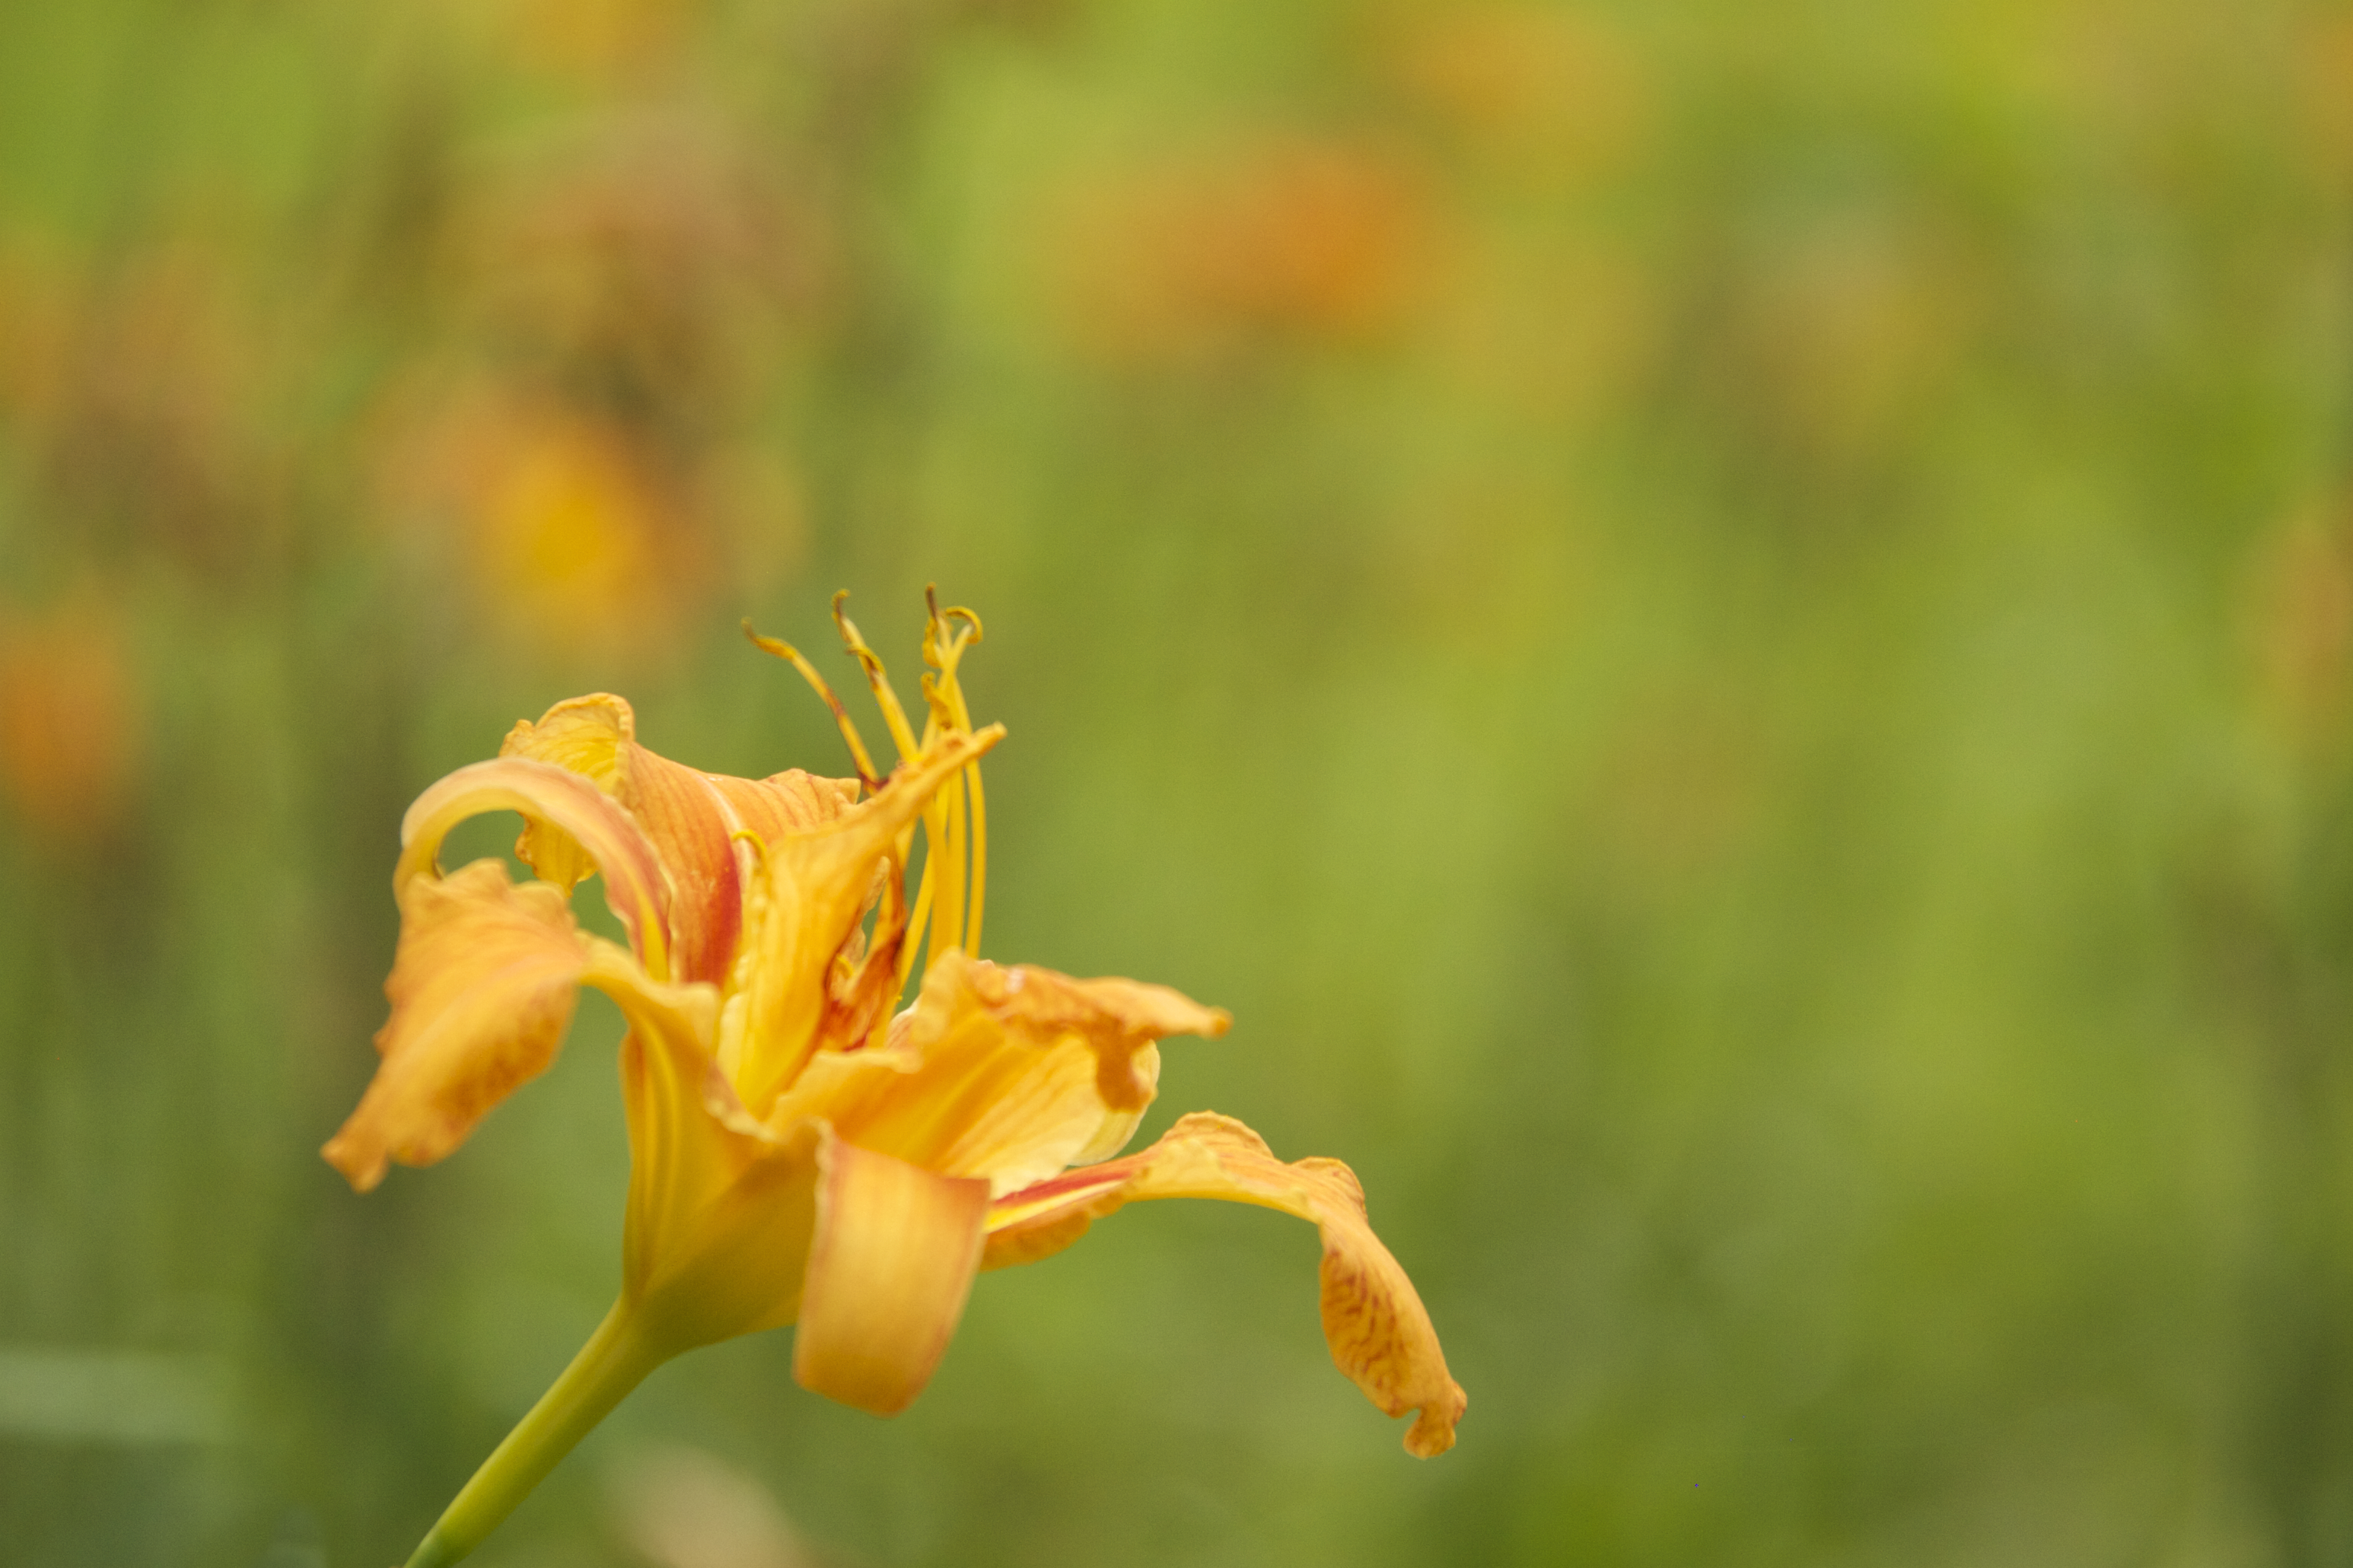 You’ll Never Starve if You Have Daylilies